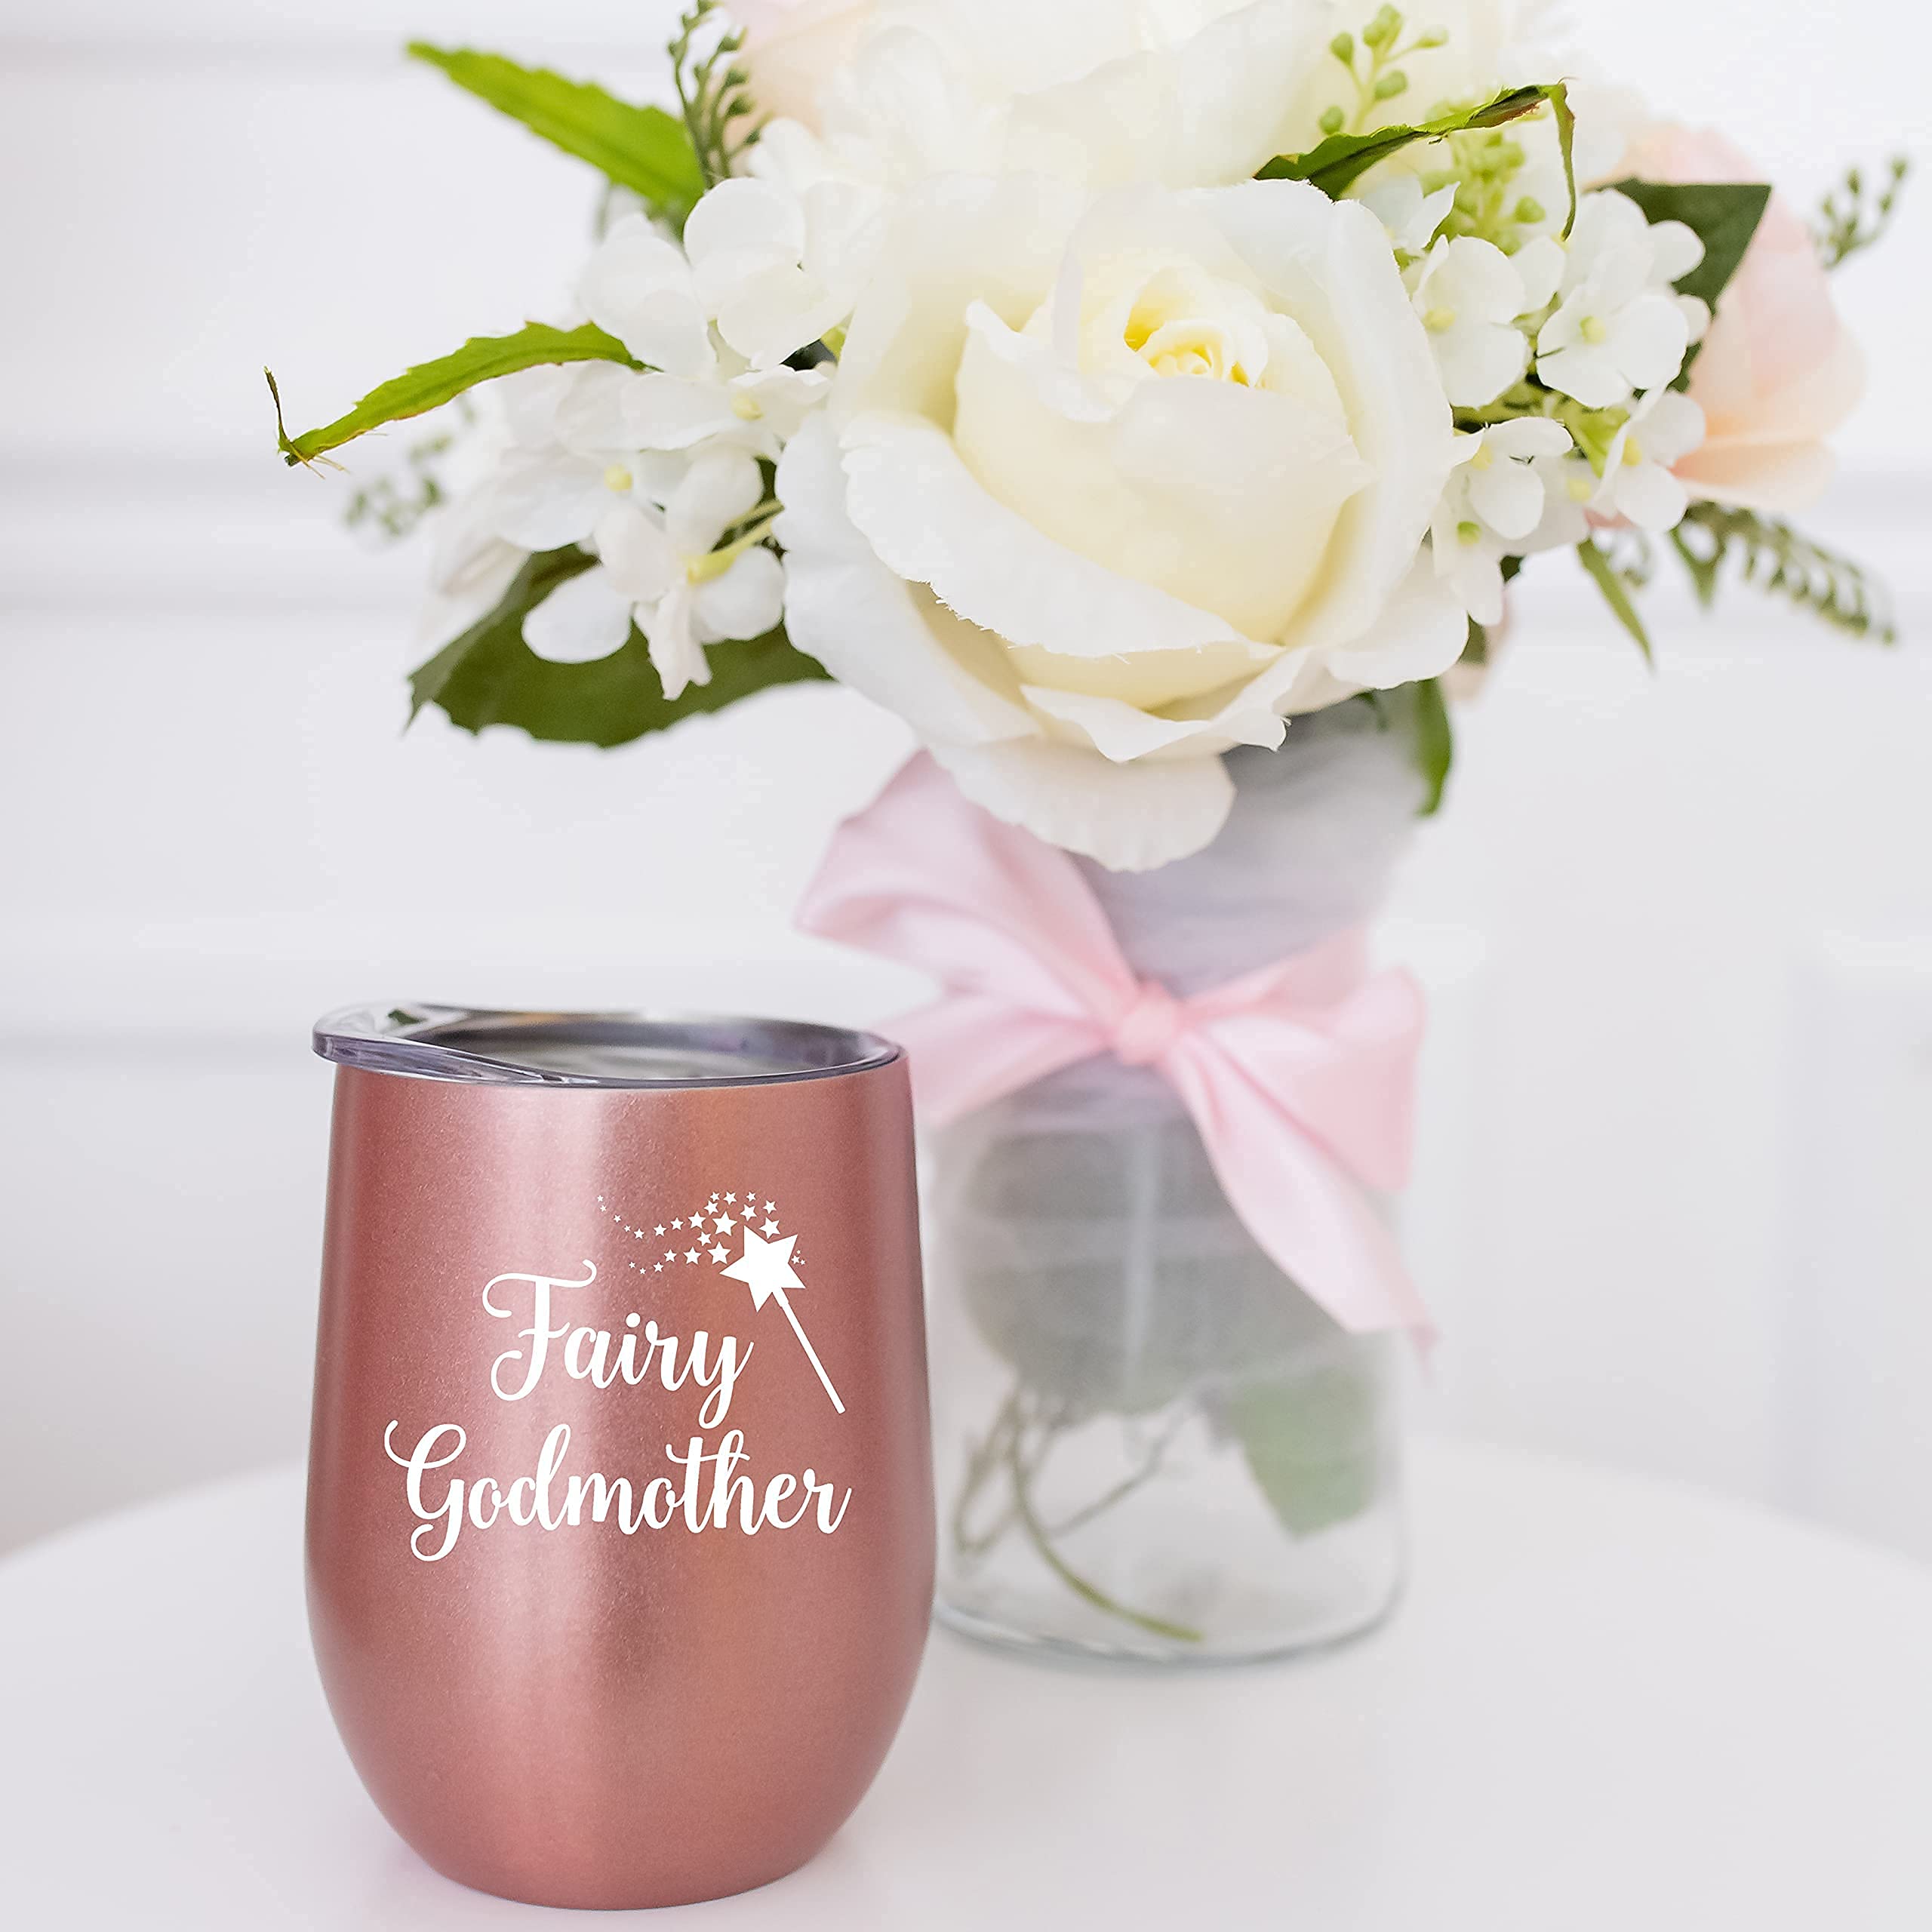 Violet & Gale Fairy Godmother Gifts for Women - Godmother Proposal Tumbler Cup Wine Glass 12oz - Beautiful Godmother Gifts from Godchild Coffee Mug Godparents Announcement Gift